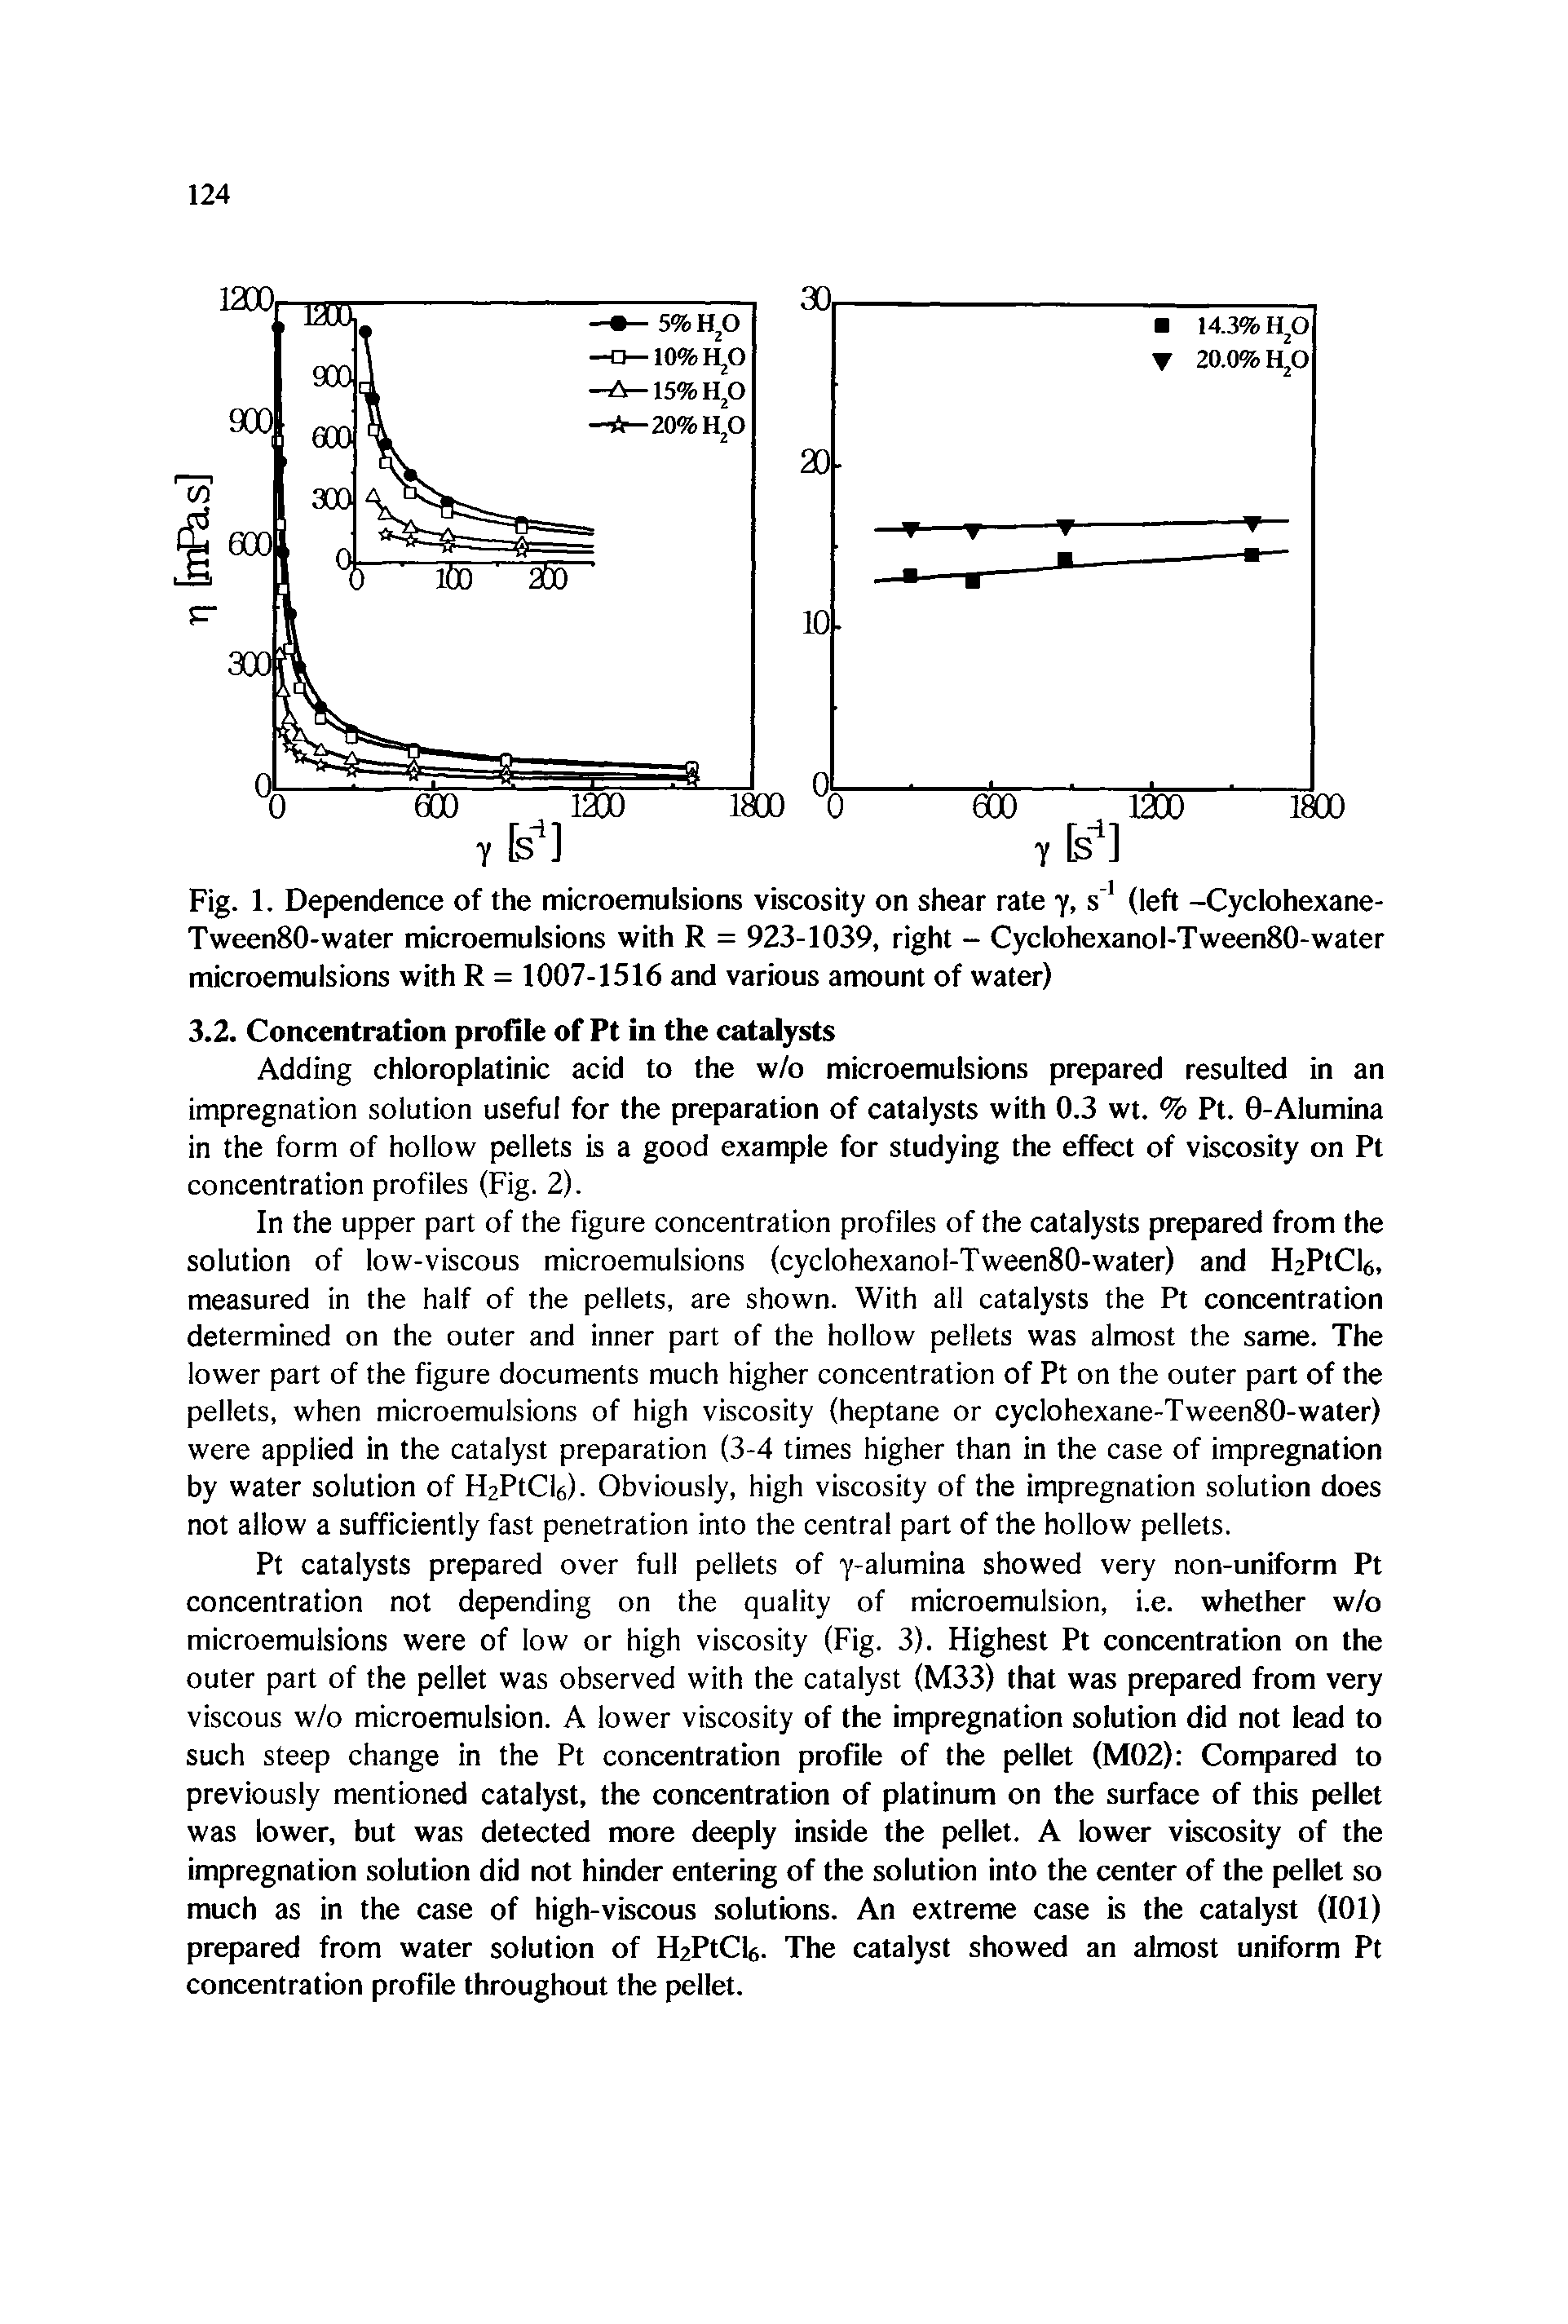 Fig. 1. Dependence of the microemulsions viscosity on shear rate y, s (left -Cyclohexane-TweenSO-water microemulsions with R = 923-1039, right - Cyclohexanol-TweenSO-water microemulsions with R = 1007-1516 and various amount of water)...